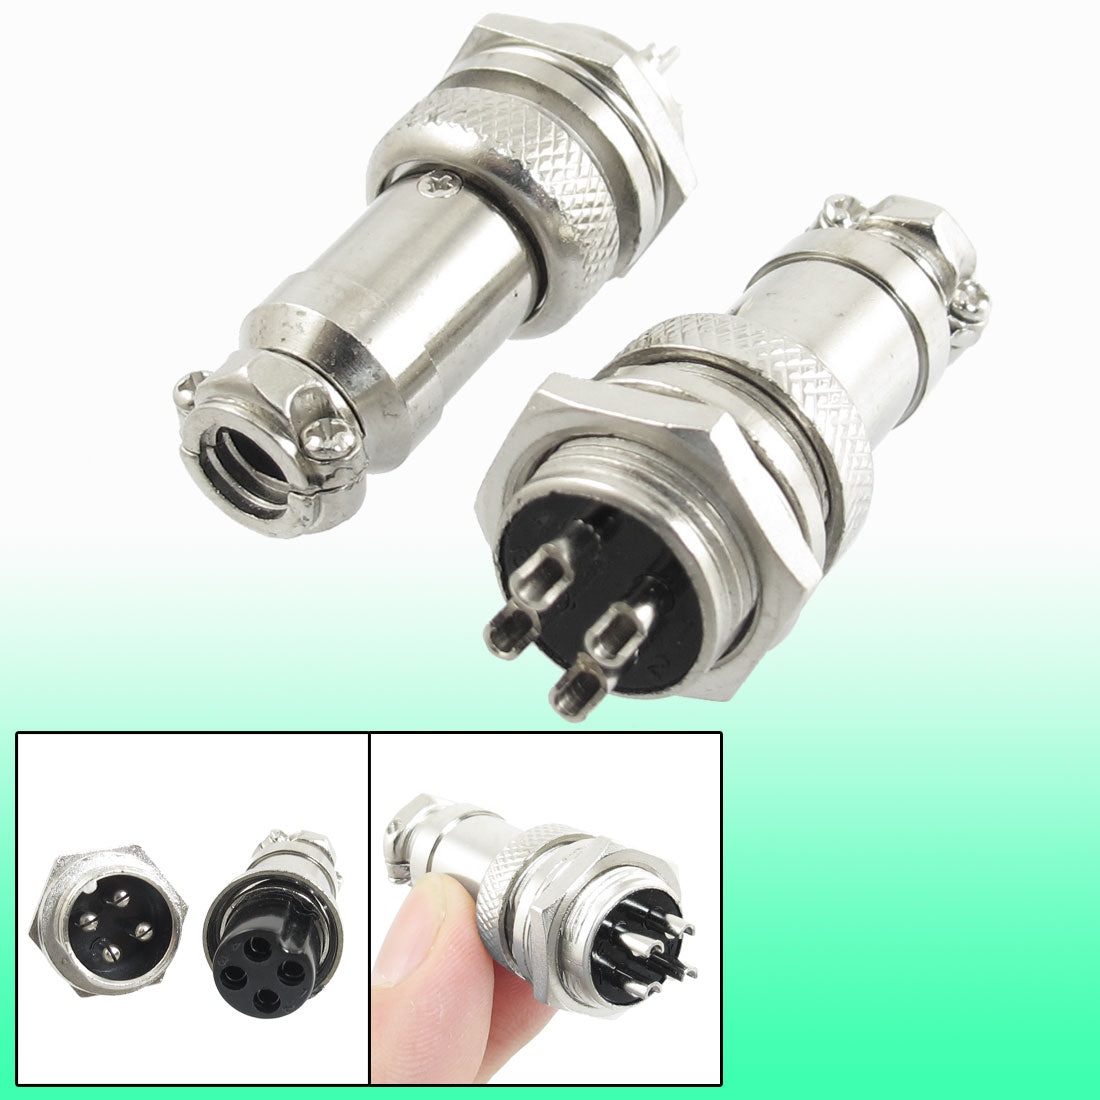 uxcell Uxcell AC 200V 5A 16mm Thread Dia 4-Pole 4 Pole Screw Aviation Connector 2Pcs